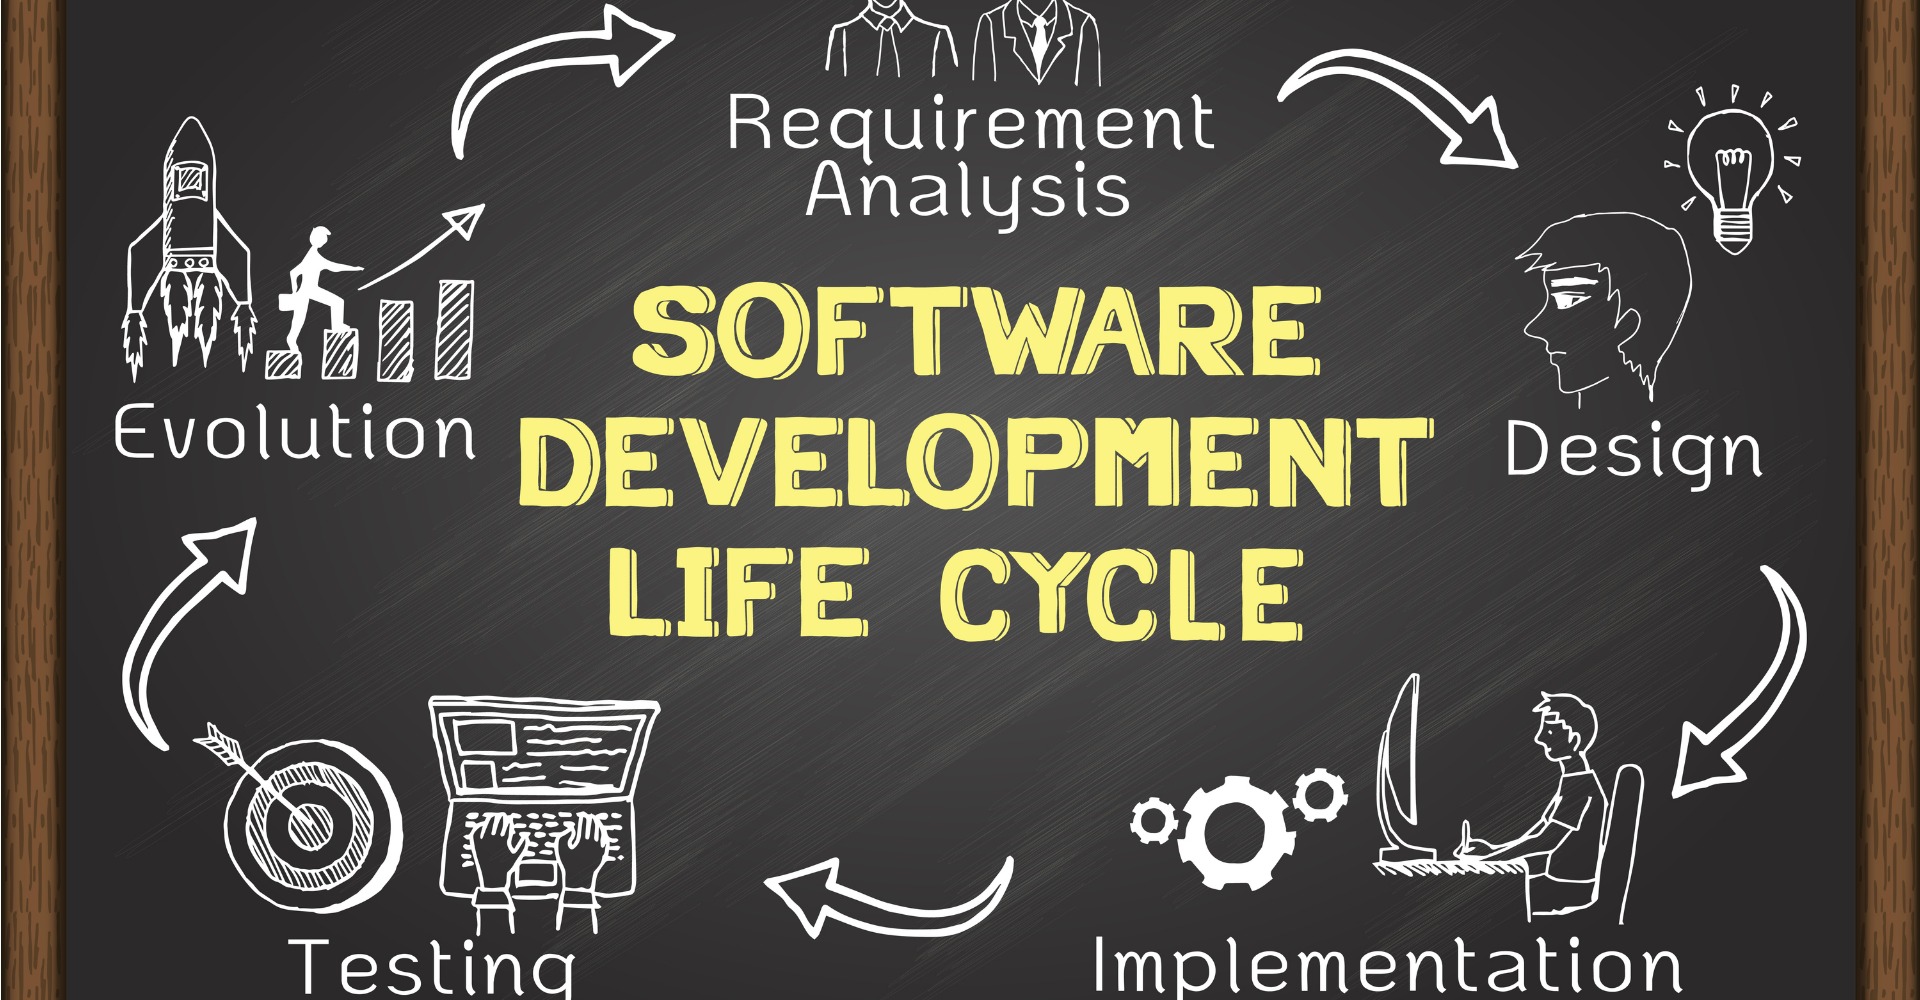 Key guidelines in developing a perfect software